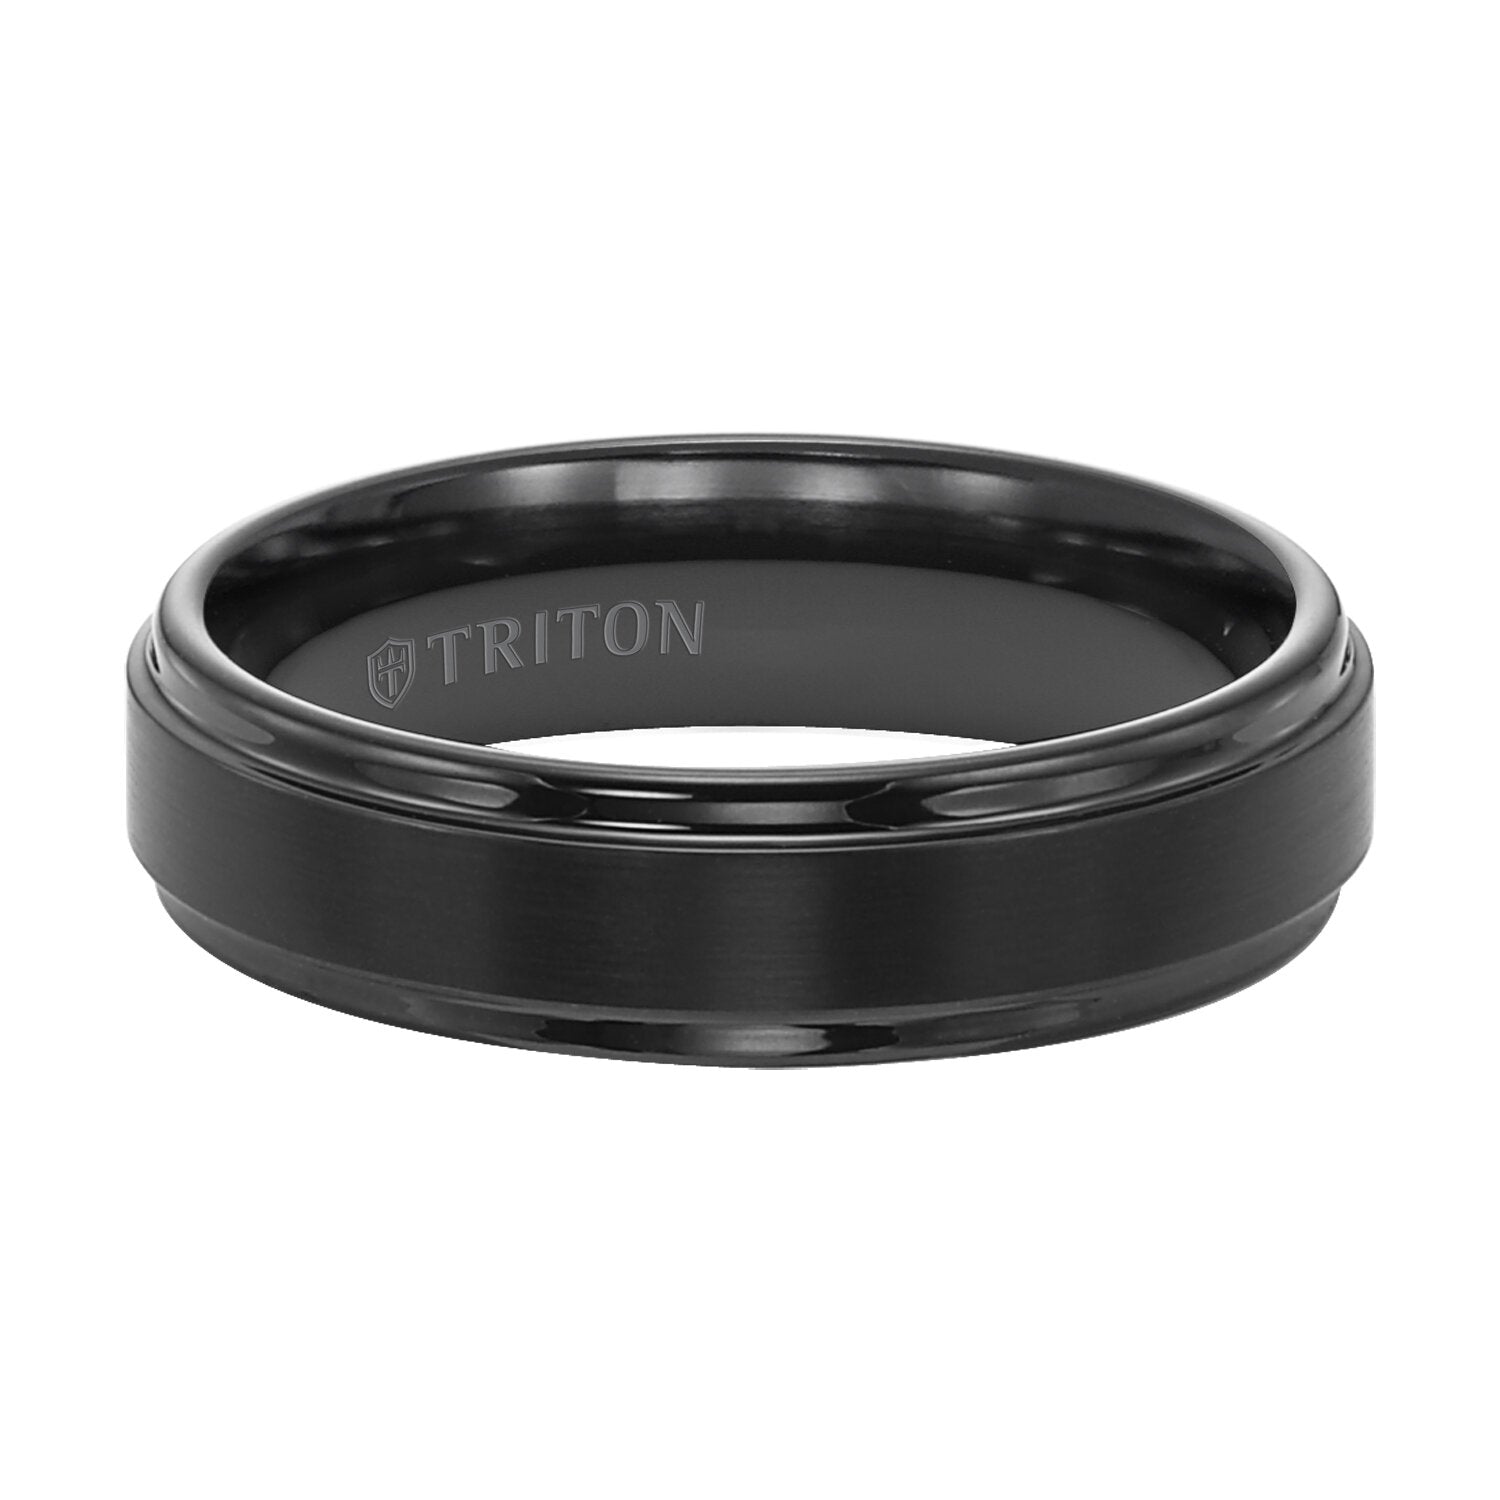 6MM Black Tungsten Carbide Ring - Satin Finish Center and Step Edge